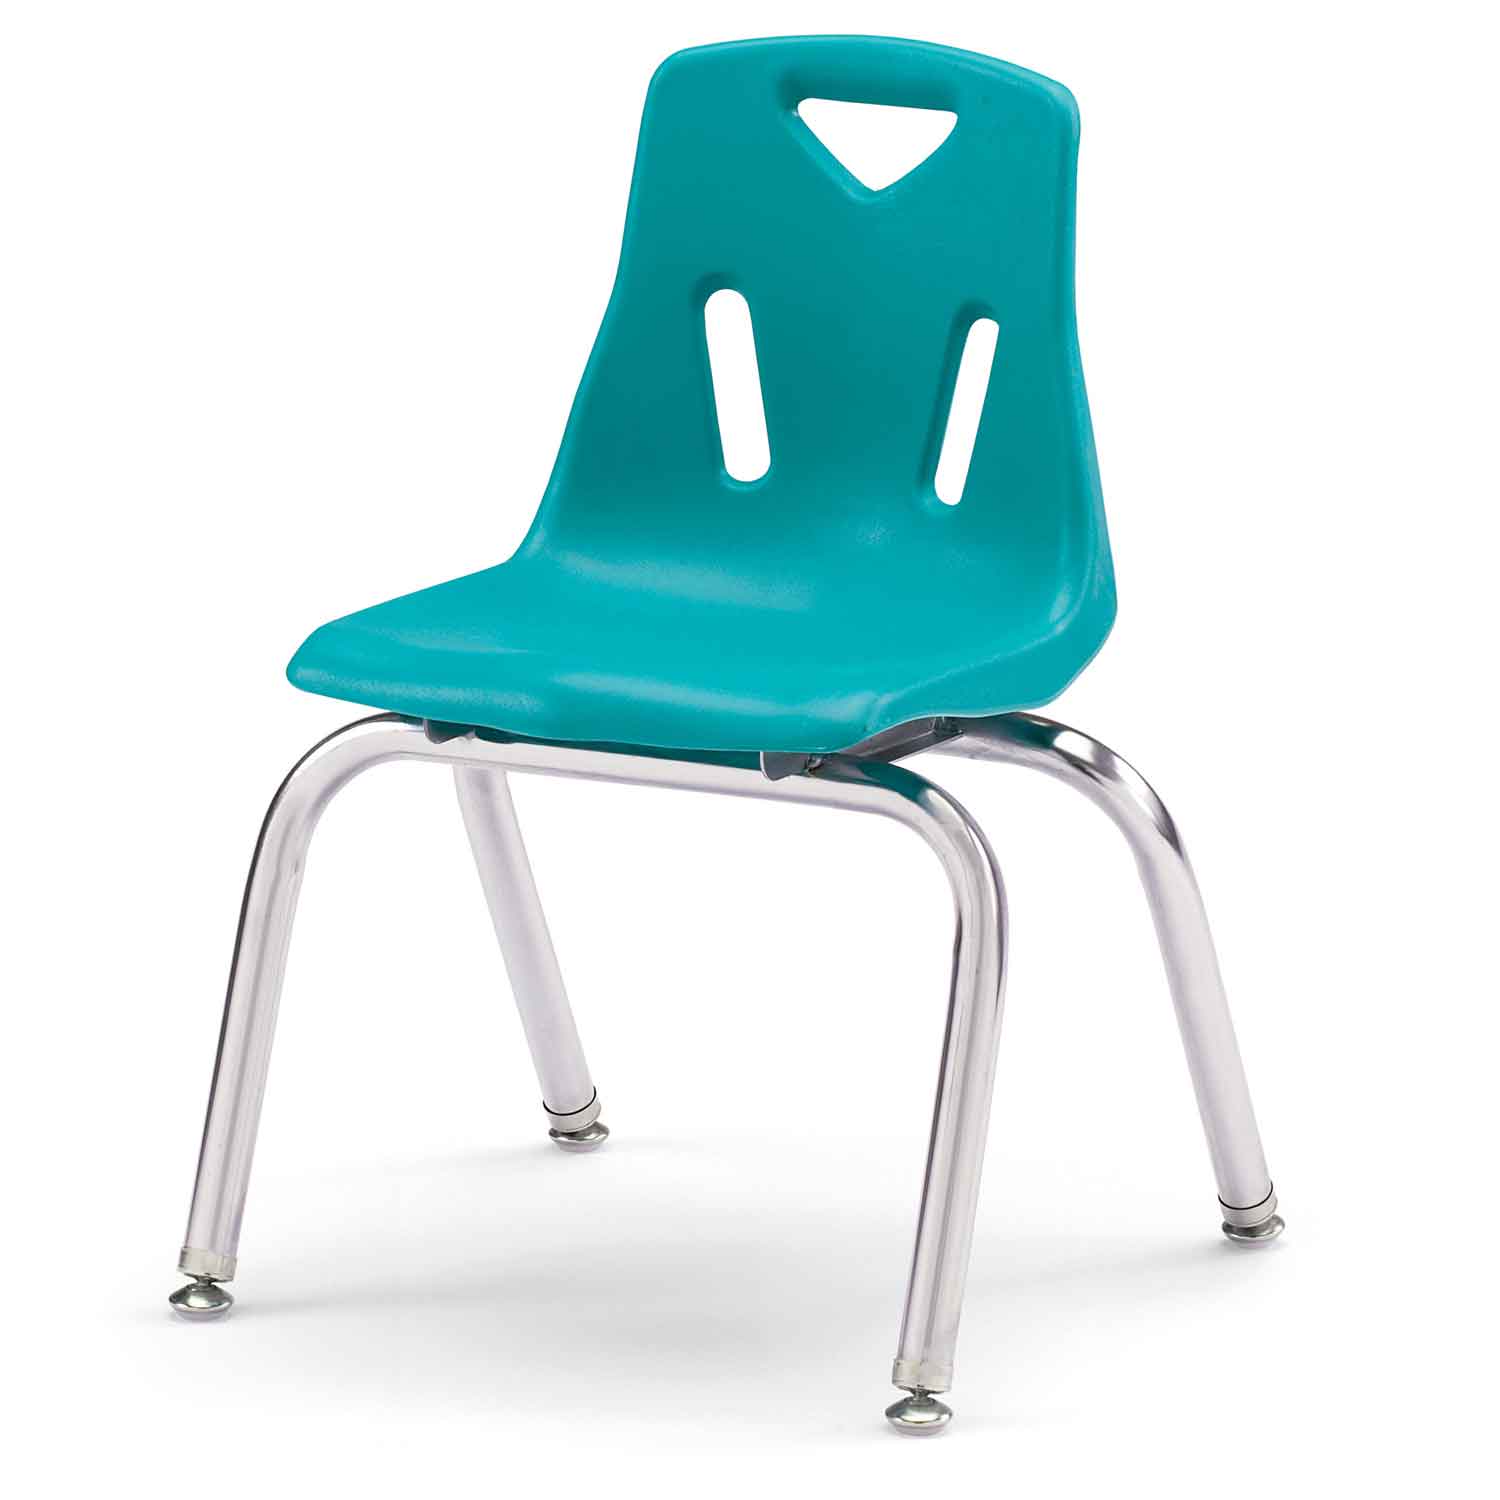 Berries® Plastic Chairs with Chrome Legs, Teal, 14"